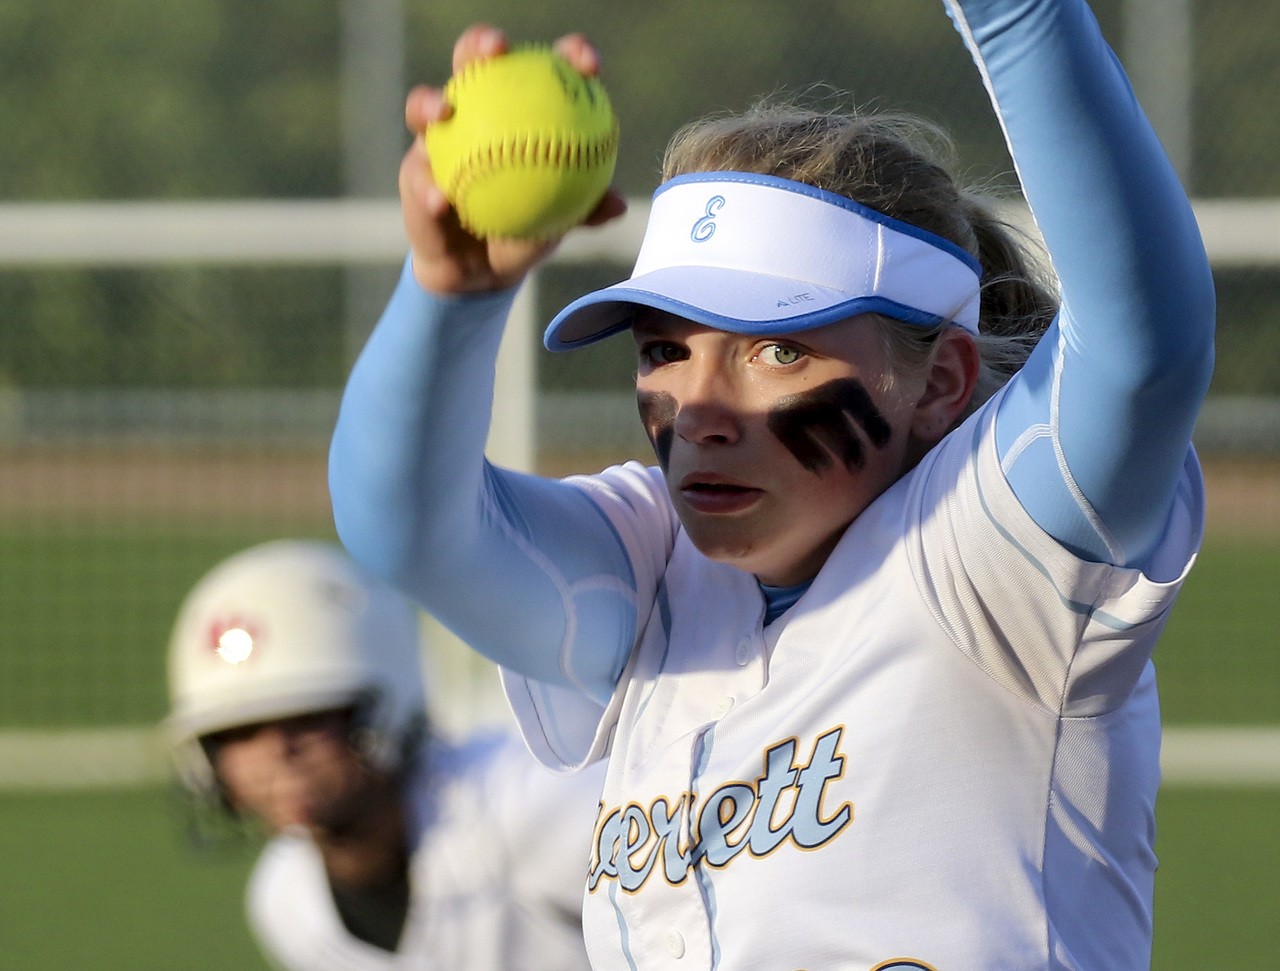 Everett’s Sydney Taggart throw a pitch against Marysville Pilchuck during a game Thursday night in Everett.